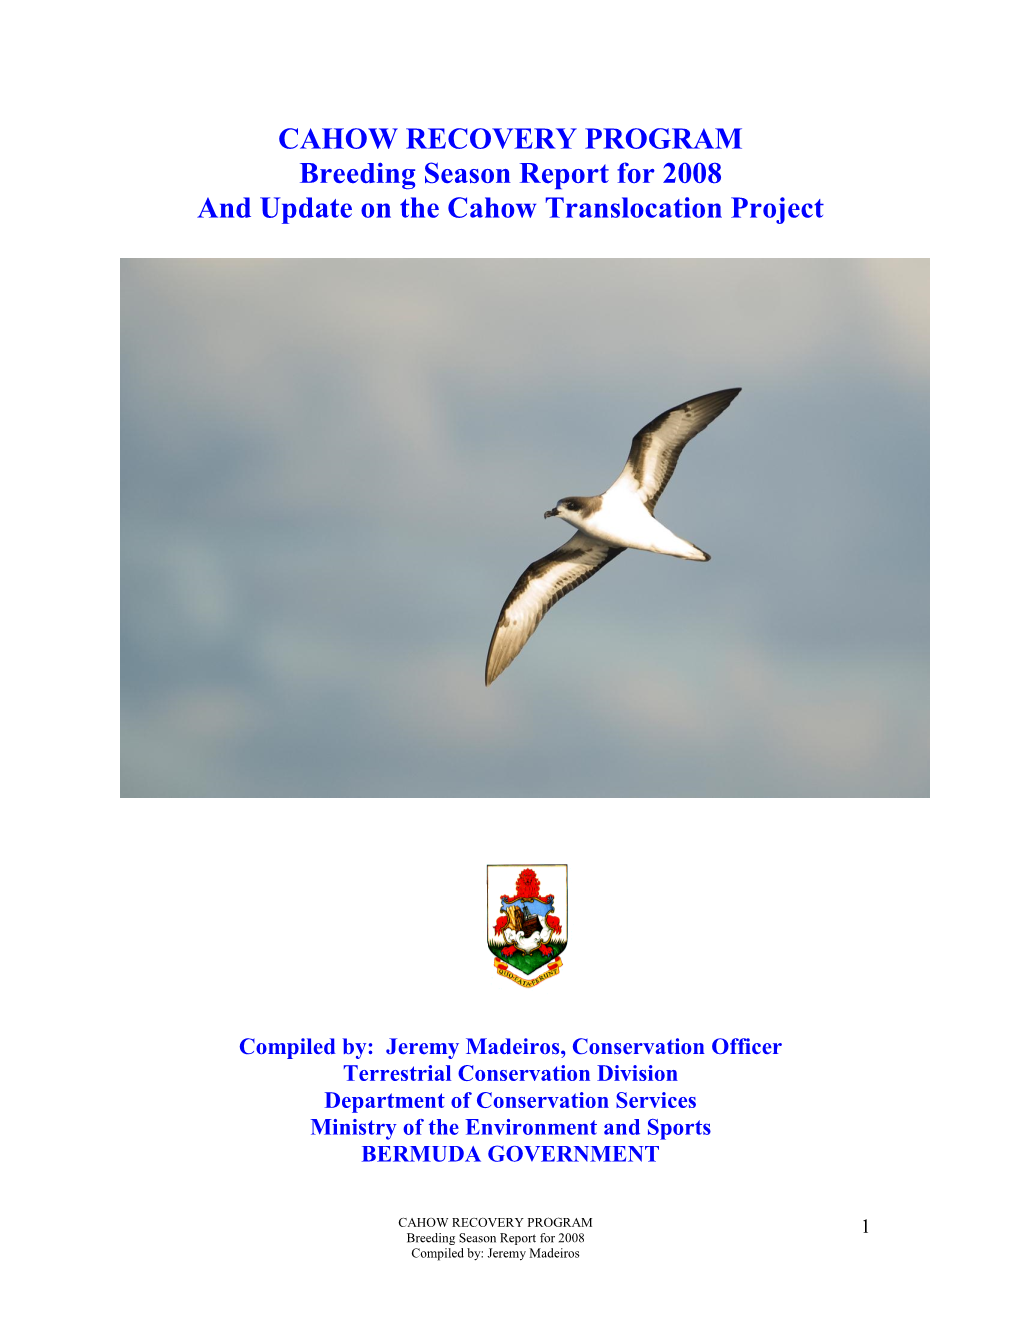 CAHOW RECOVERY PROGRAM Breeding Season Report for 2008 and Update on the Cahow Translocation Project